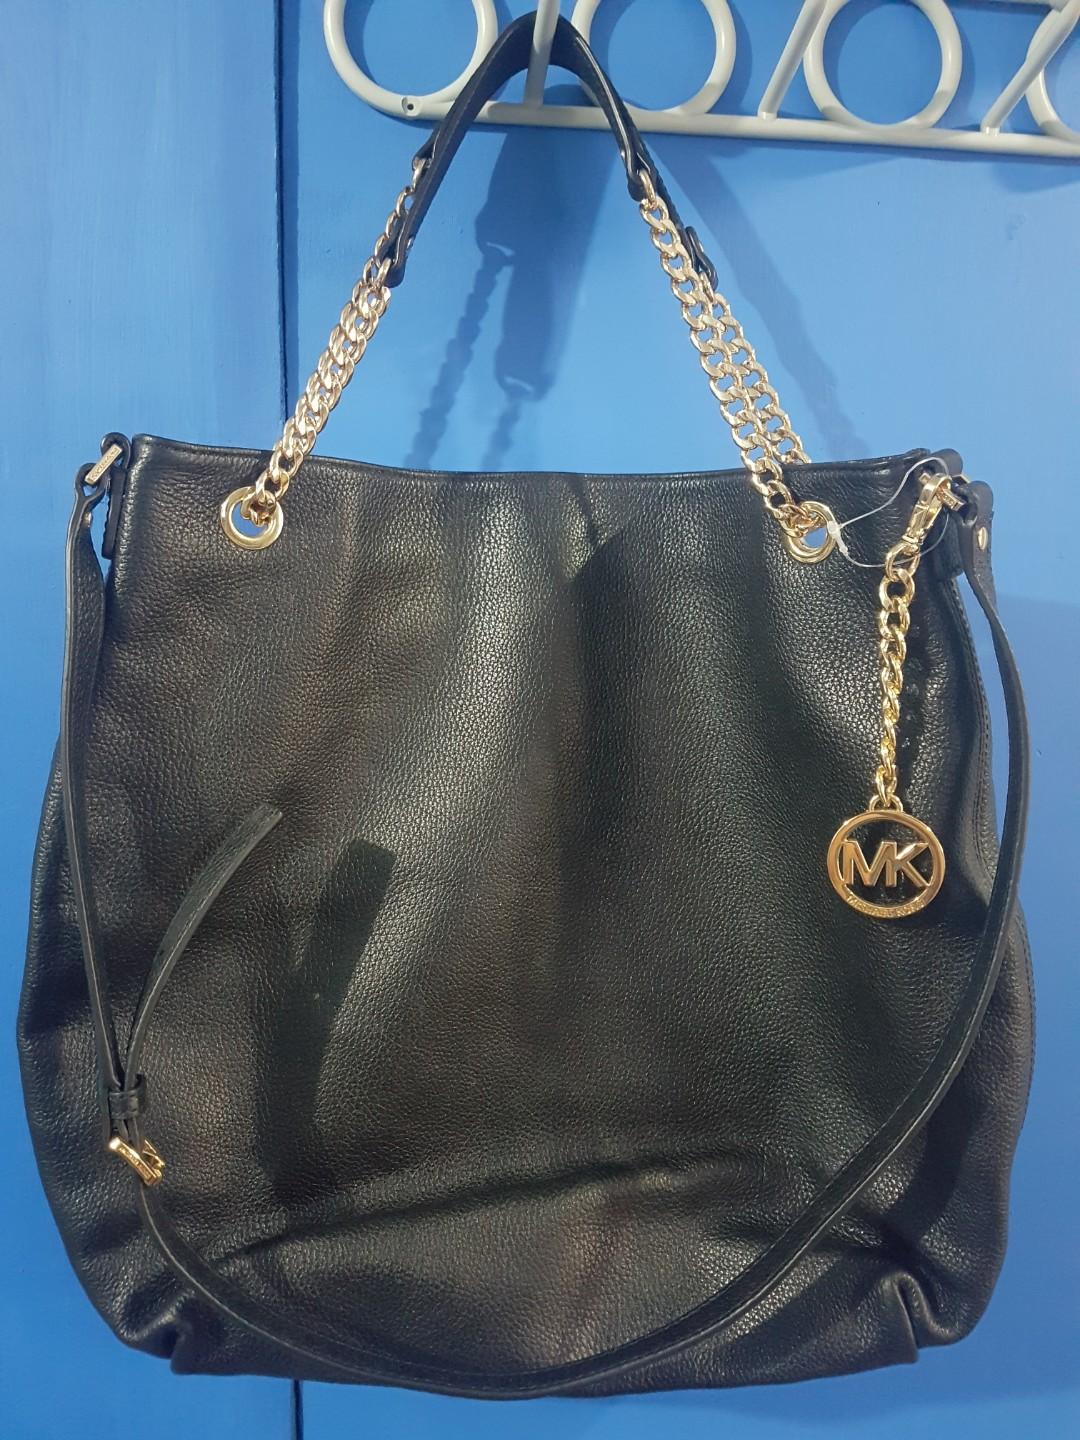 michael kors purse with gold chain handle